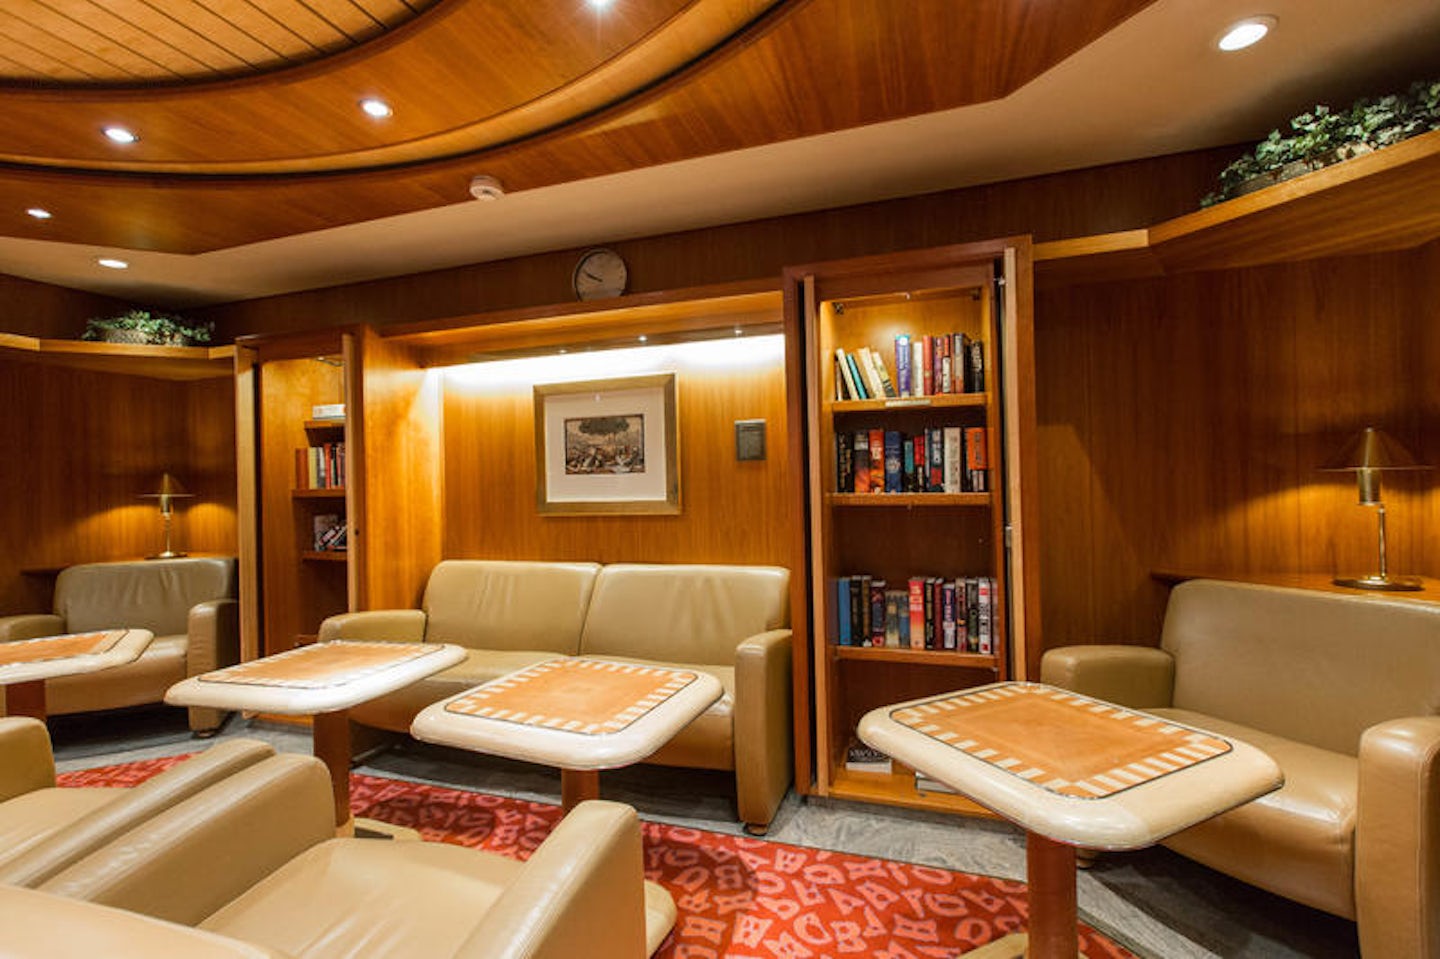 Library on Radiance of the Seas